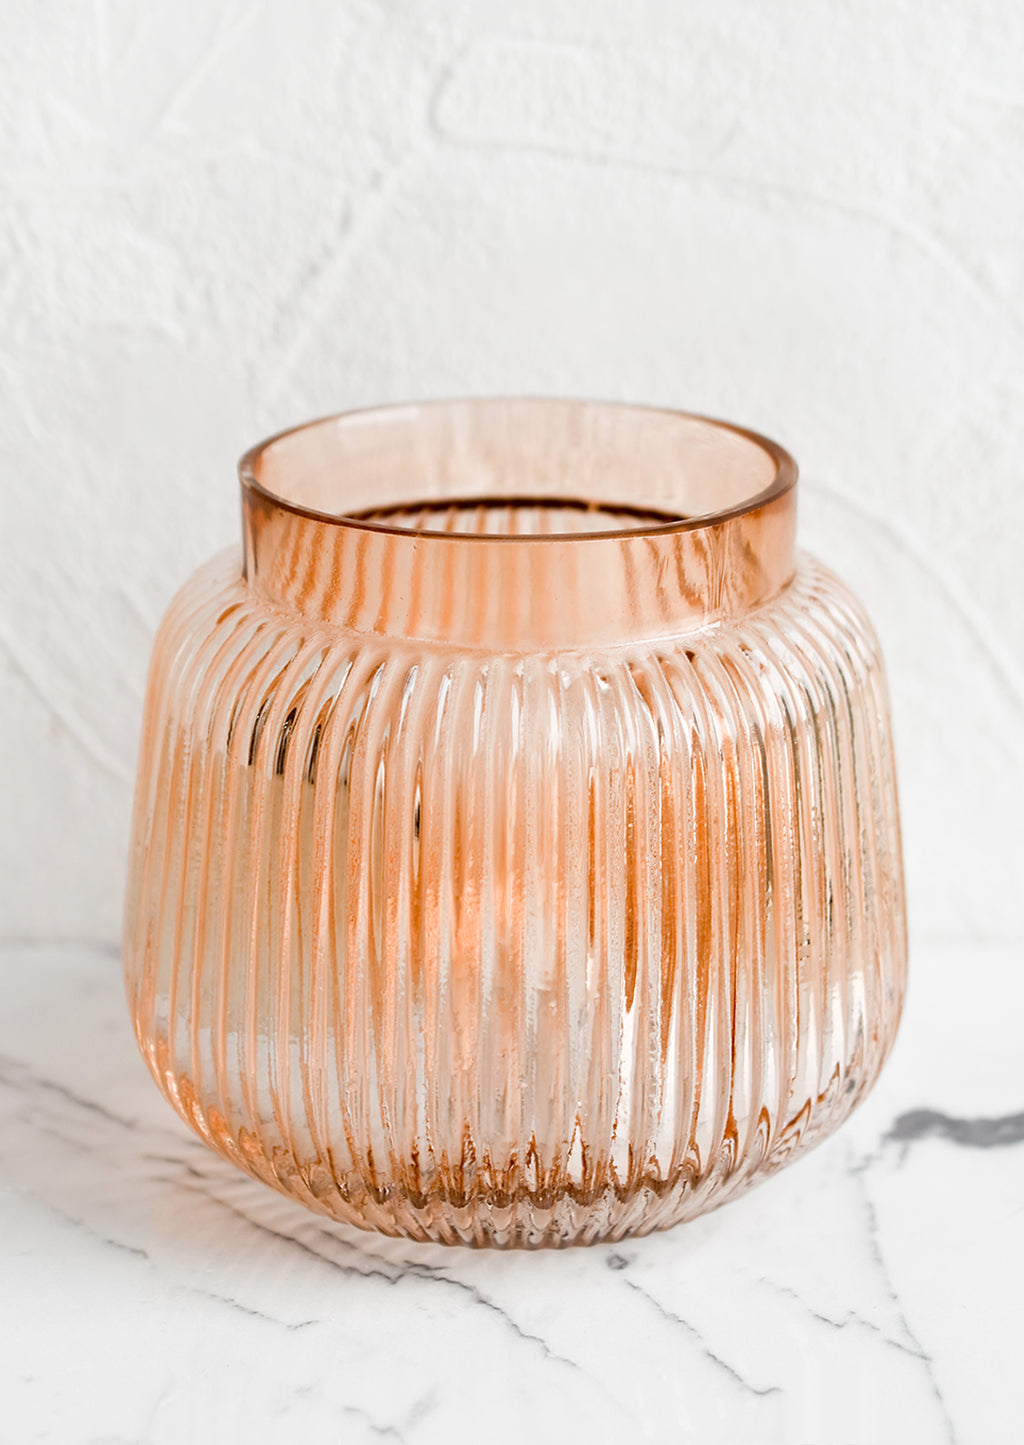 Short: A short glass vase with wide opening and ribbed texture.